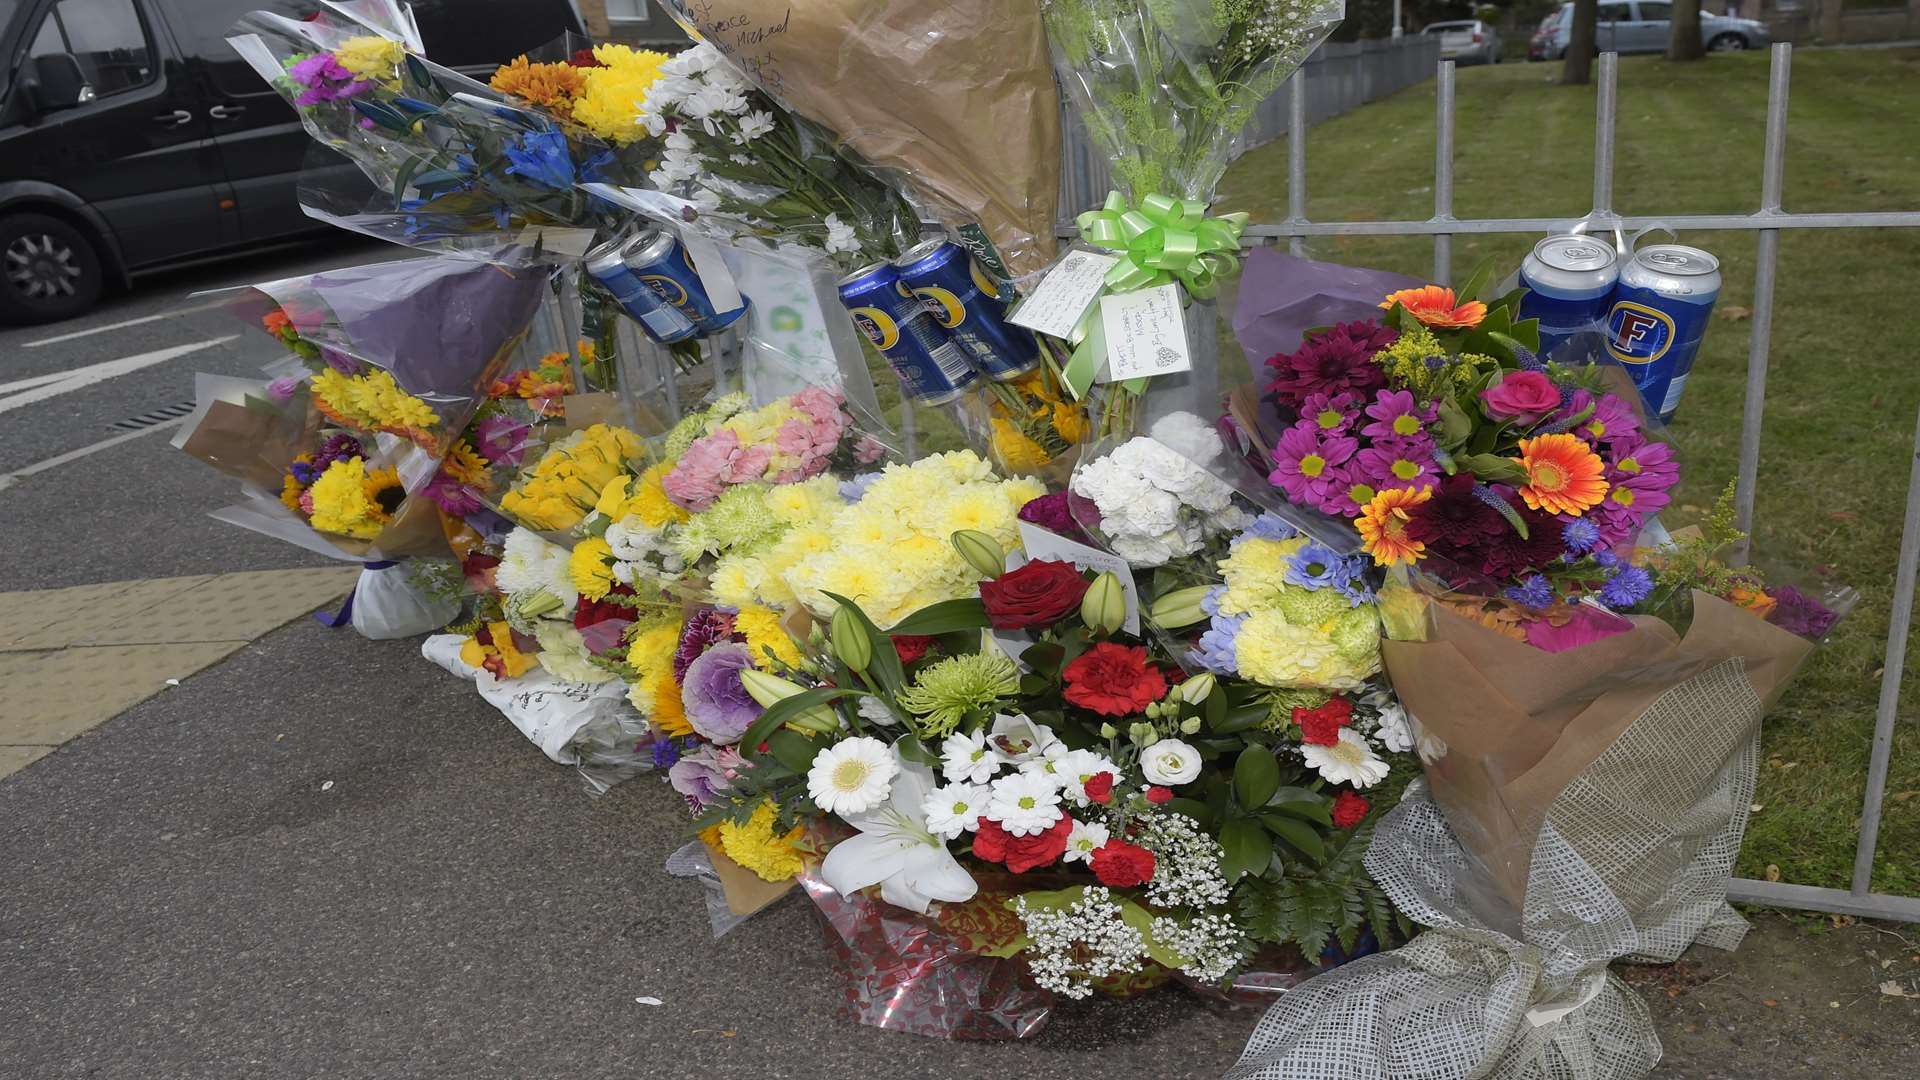 Floral tributes left at the scene of the crash in Ramsgate